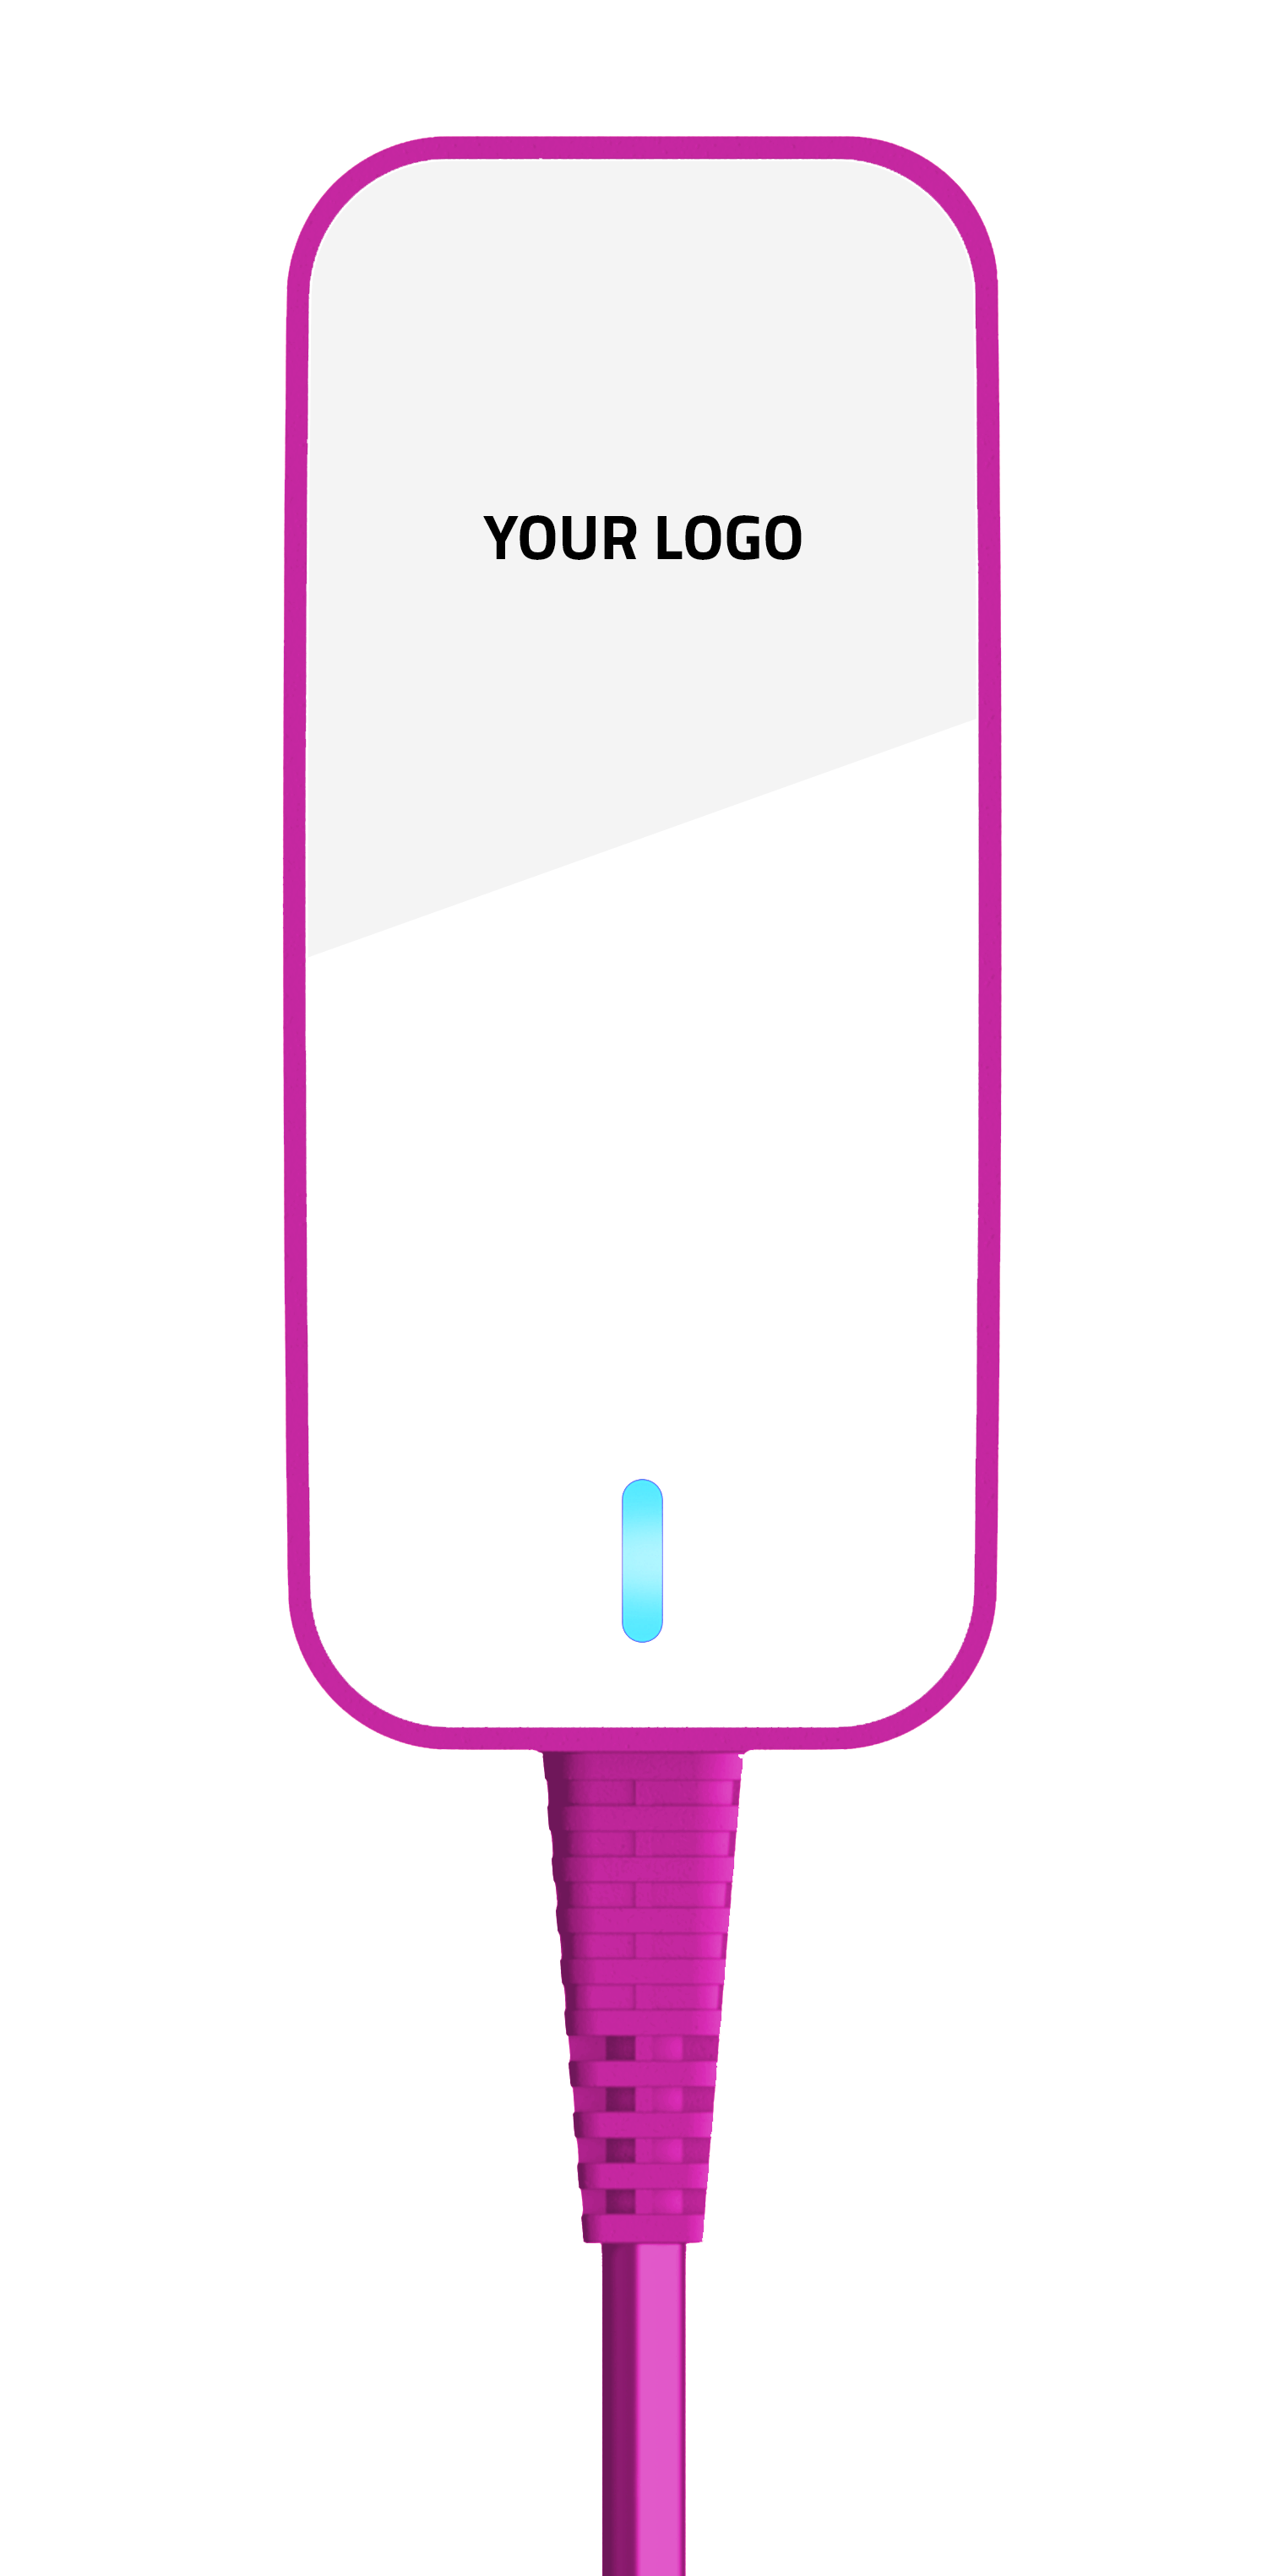 A white power supply charger with a blue light on it and pink trim.